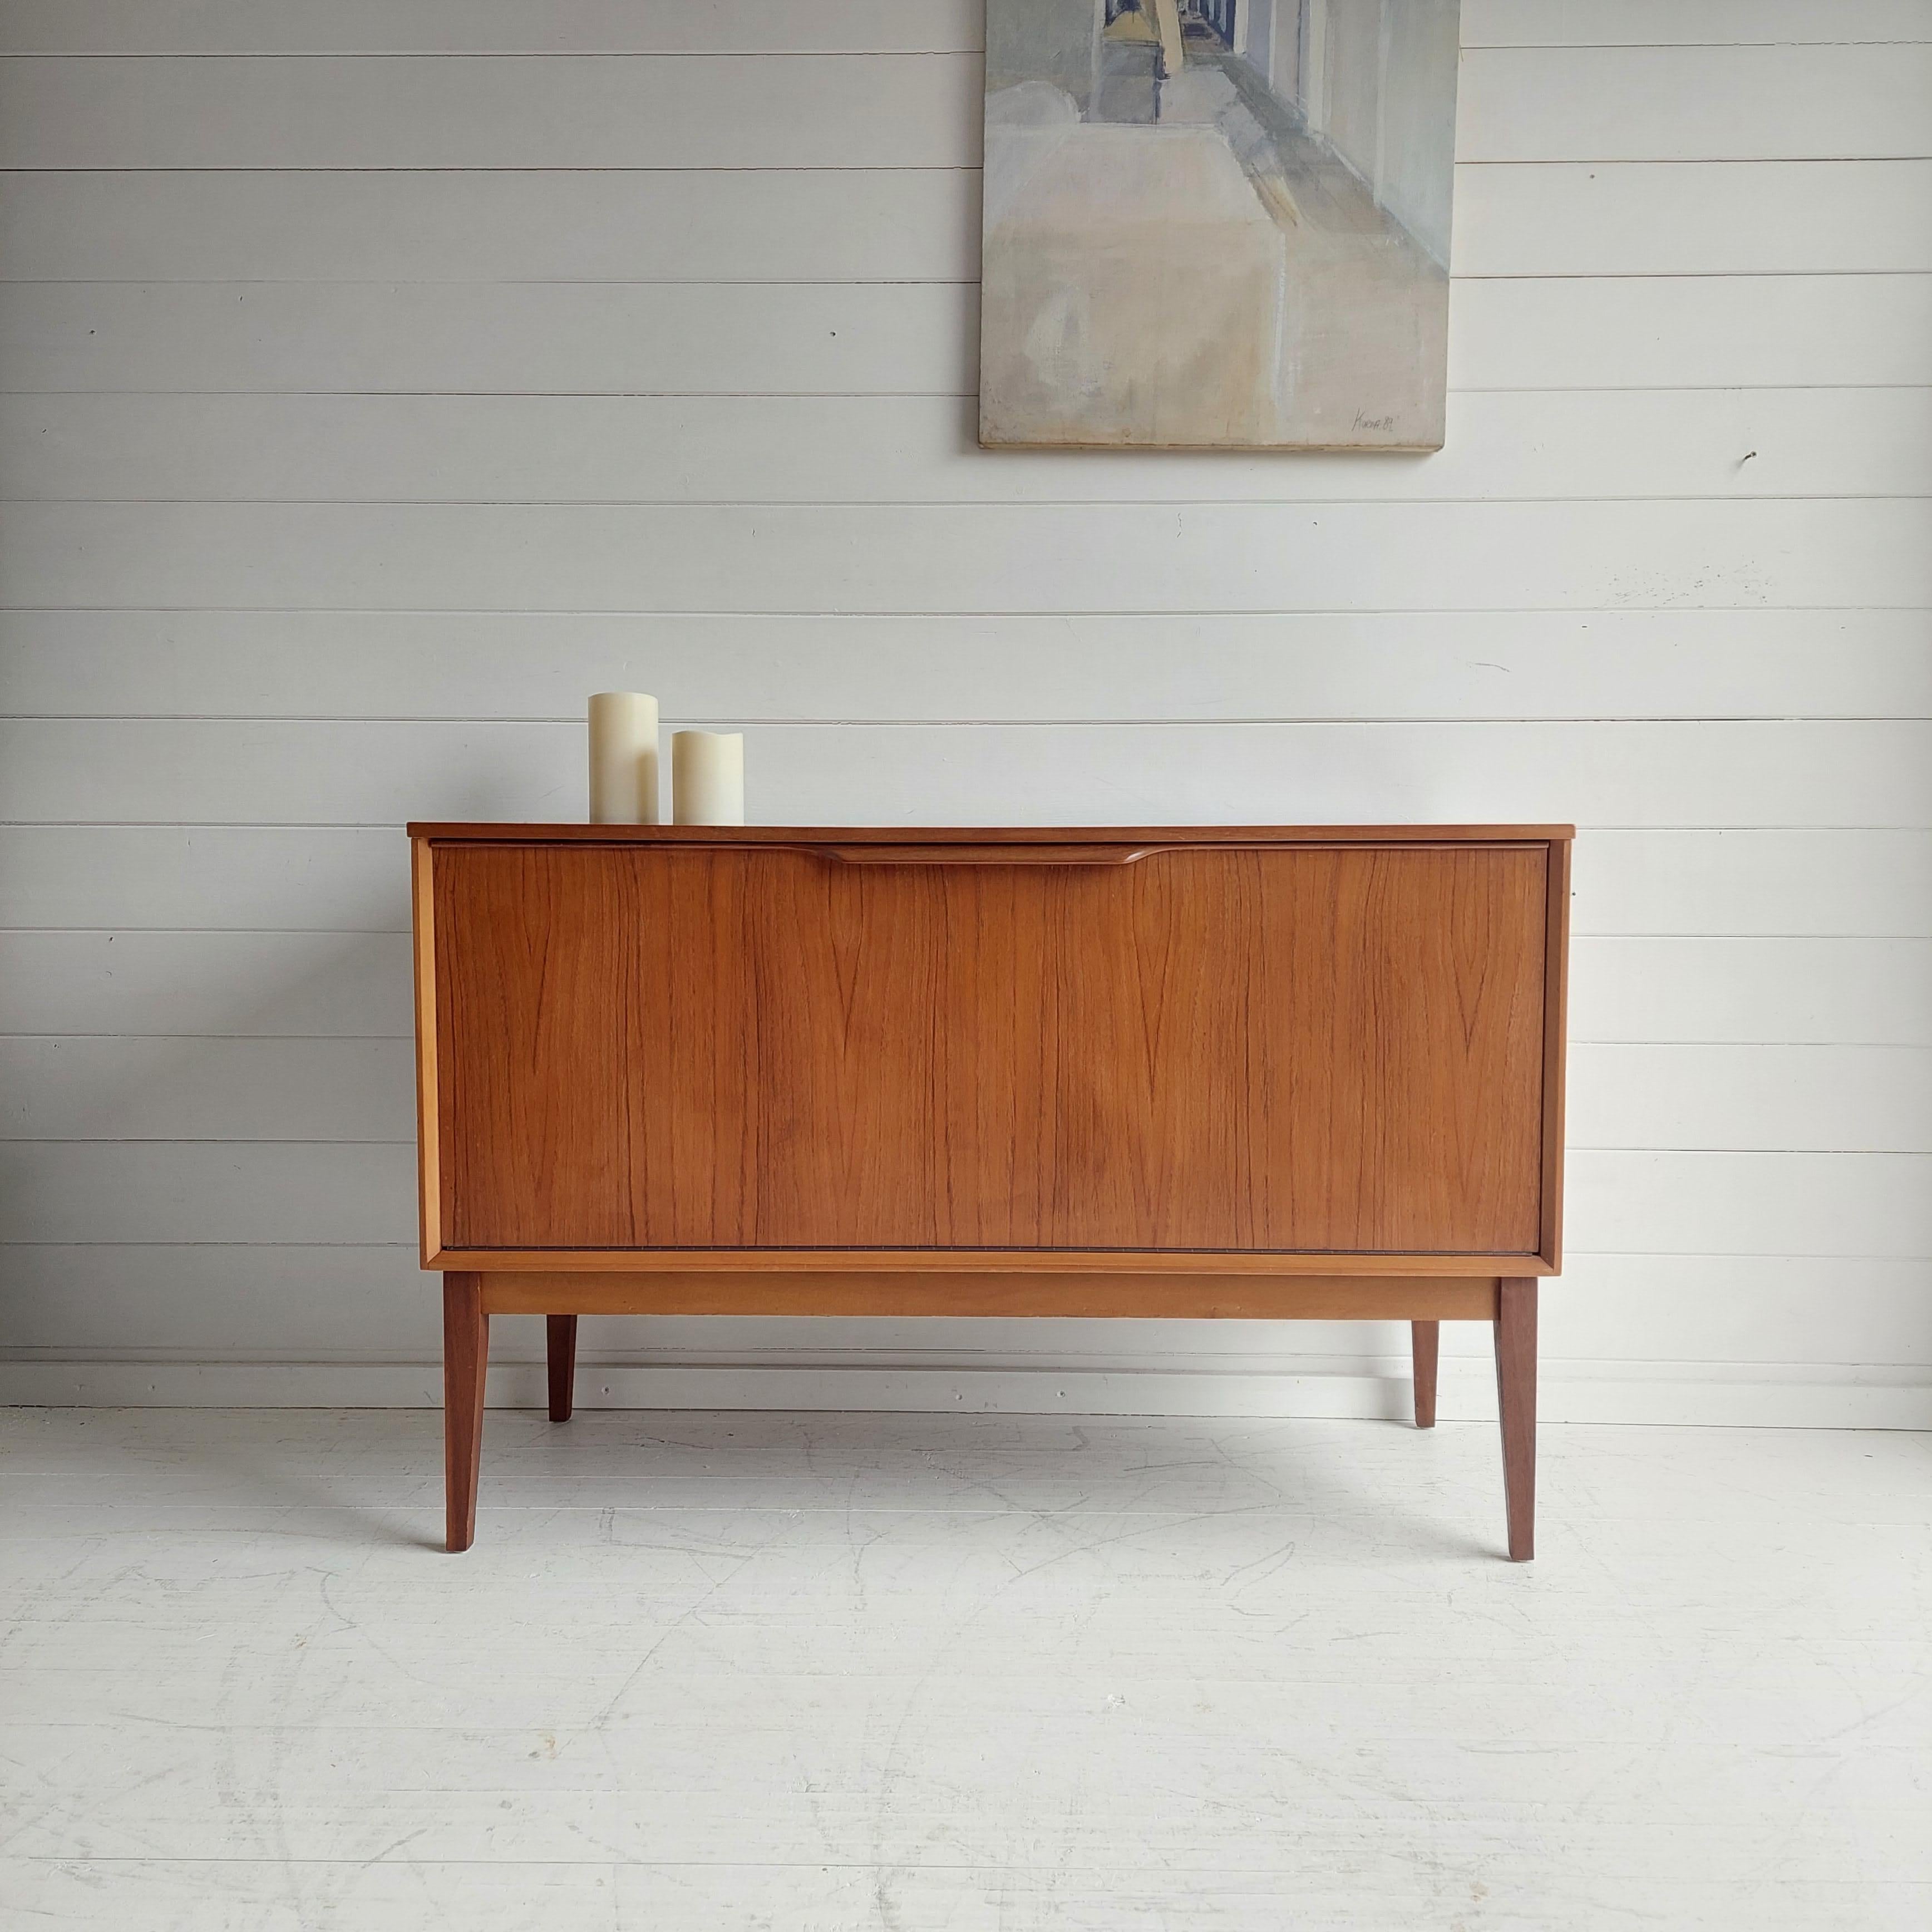 A beautifully designed & crafted, Mid Century vinyl record cabinet manufactured by Dynatron.

Featuring minimal clean lines with drop down front to reveal a large storage area with six vertical vinyl dividers. 
Perfect for displaying a turntable and